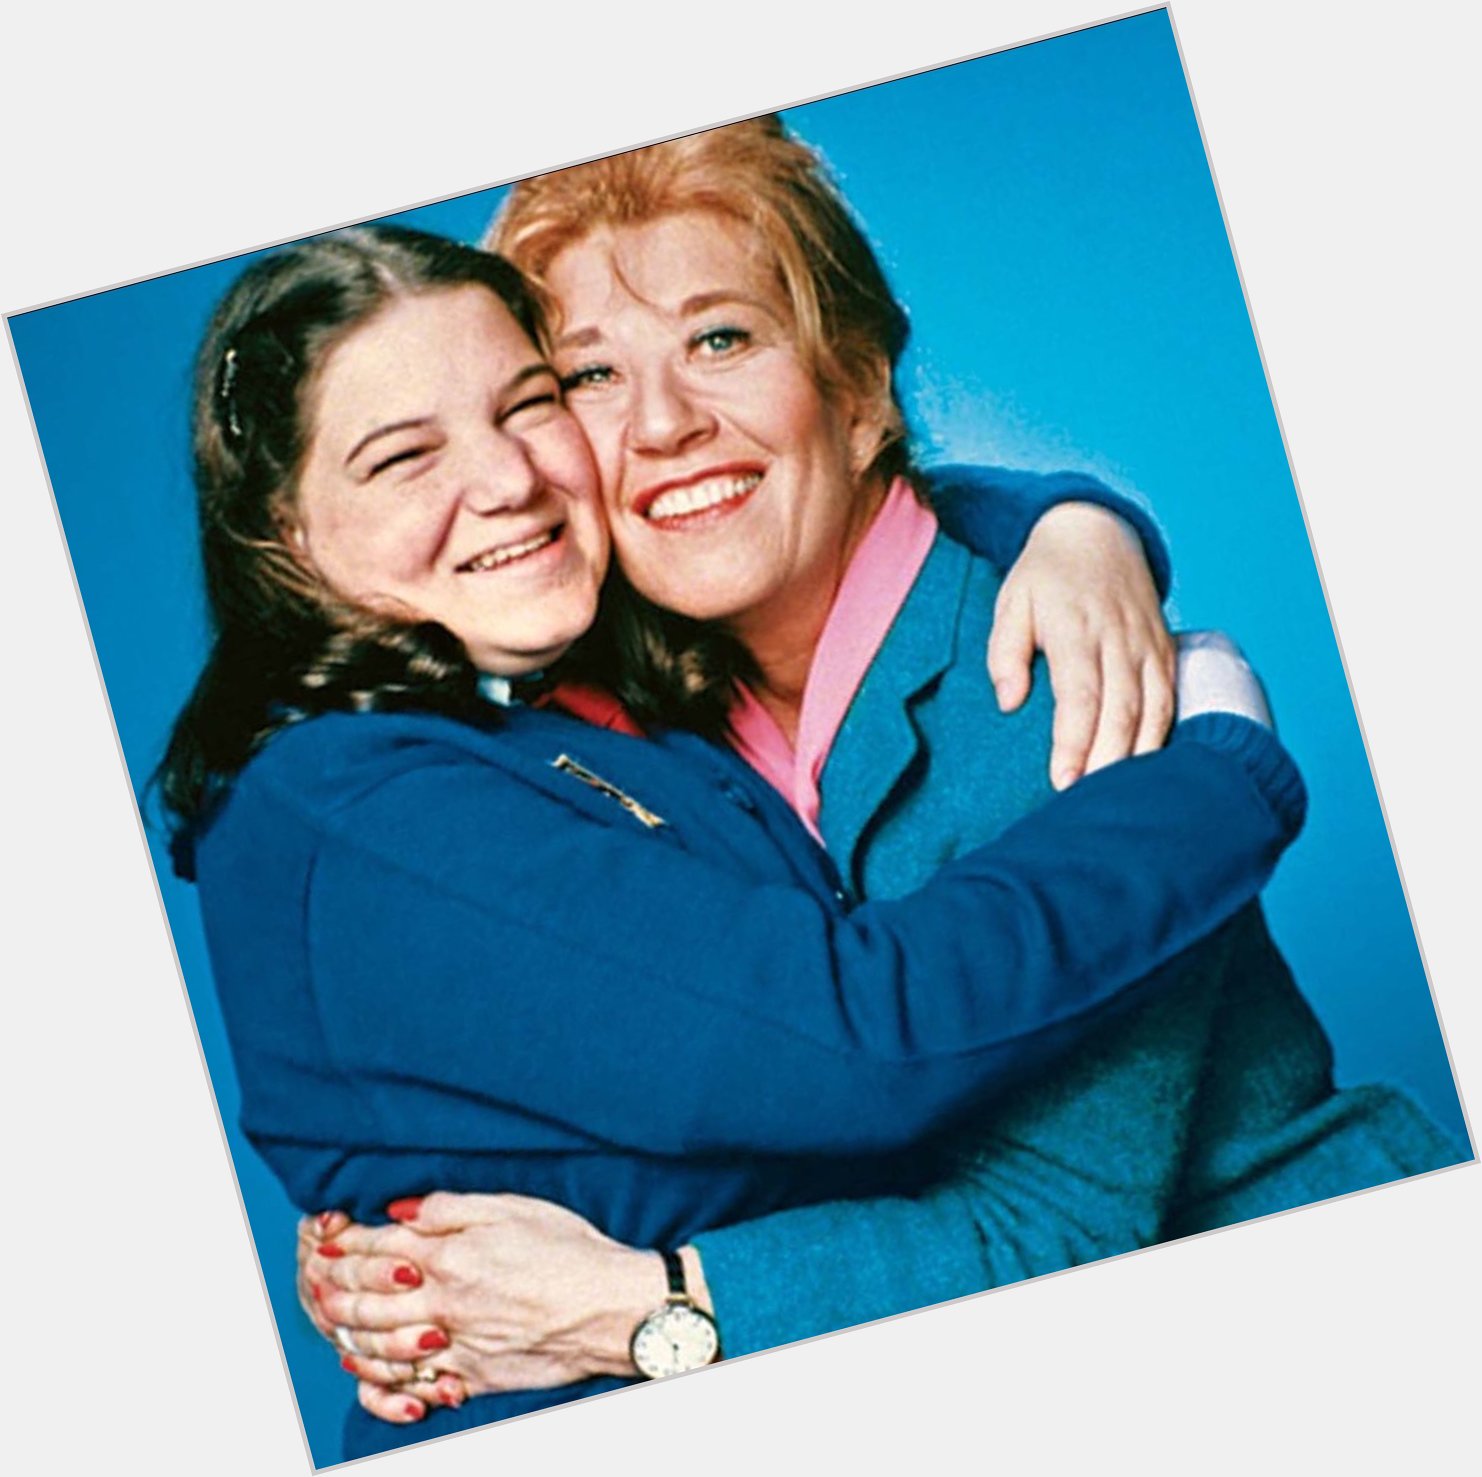 Happy birthday to Mindy Cohn! Watch her play Natalie Green on The Facts of Life . 